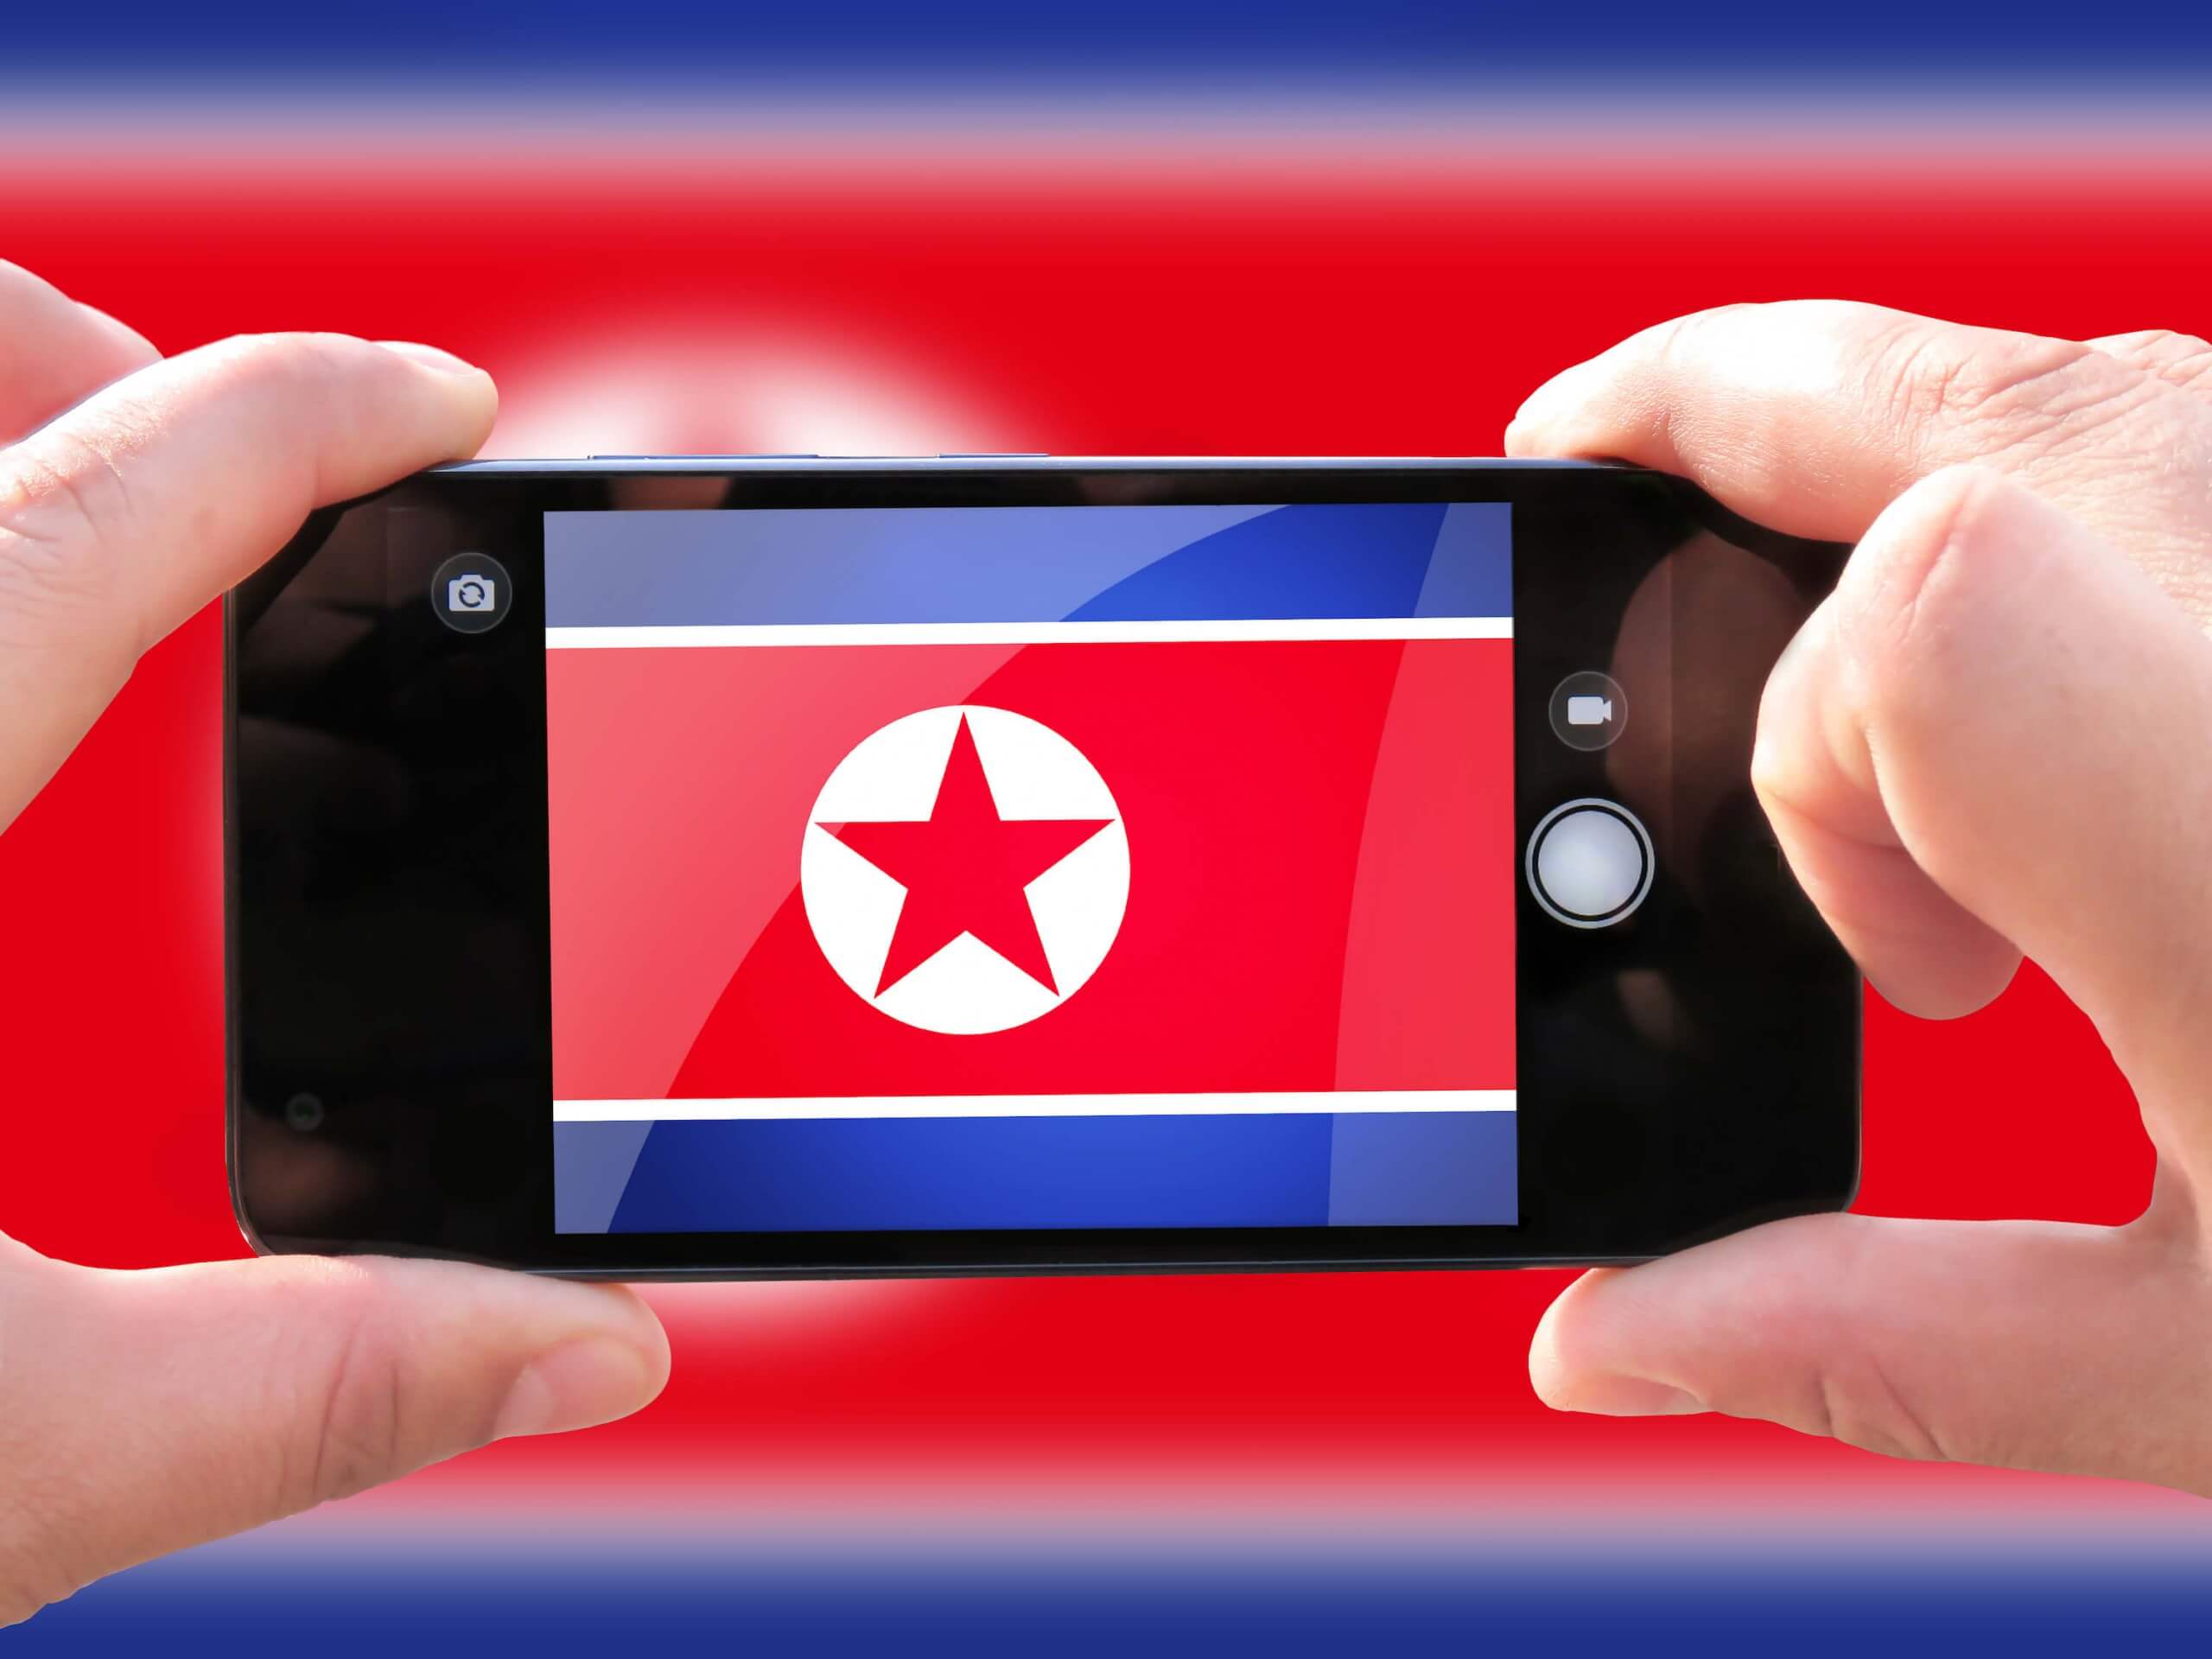 North Korea's 3G network reportedly built in secret with help from Huawei